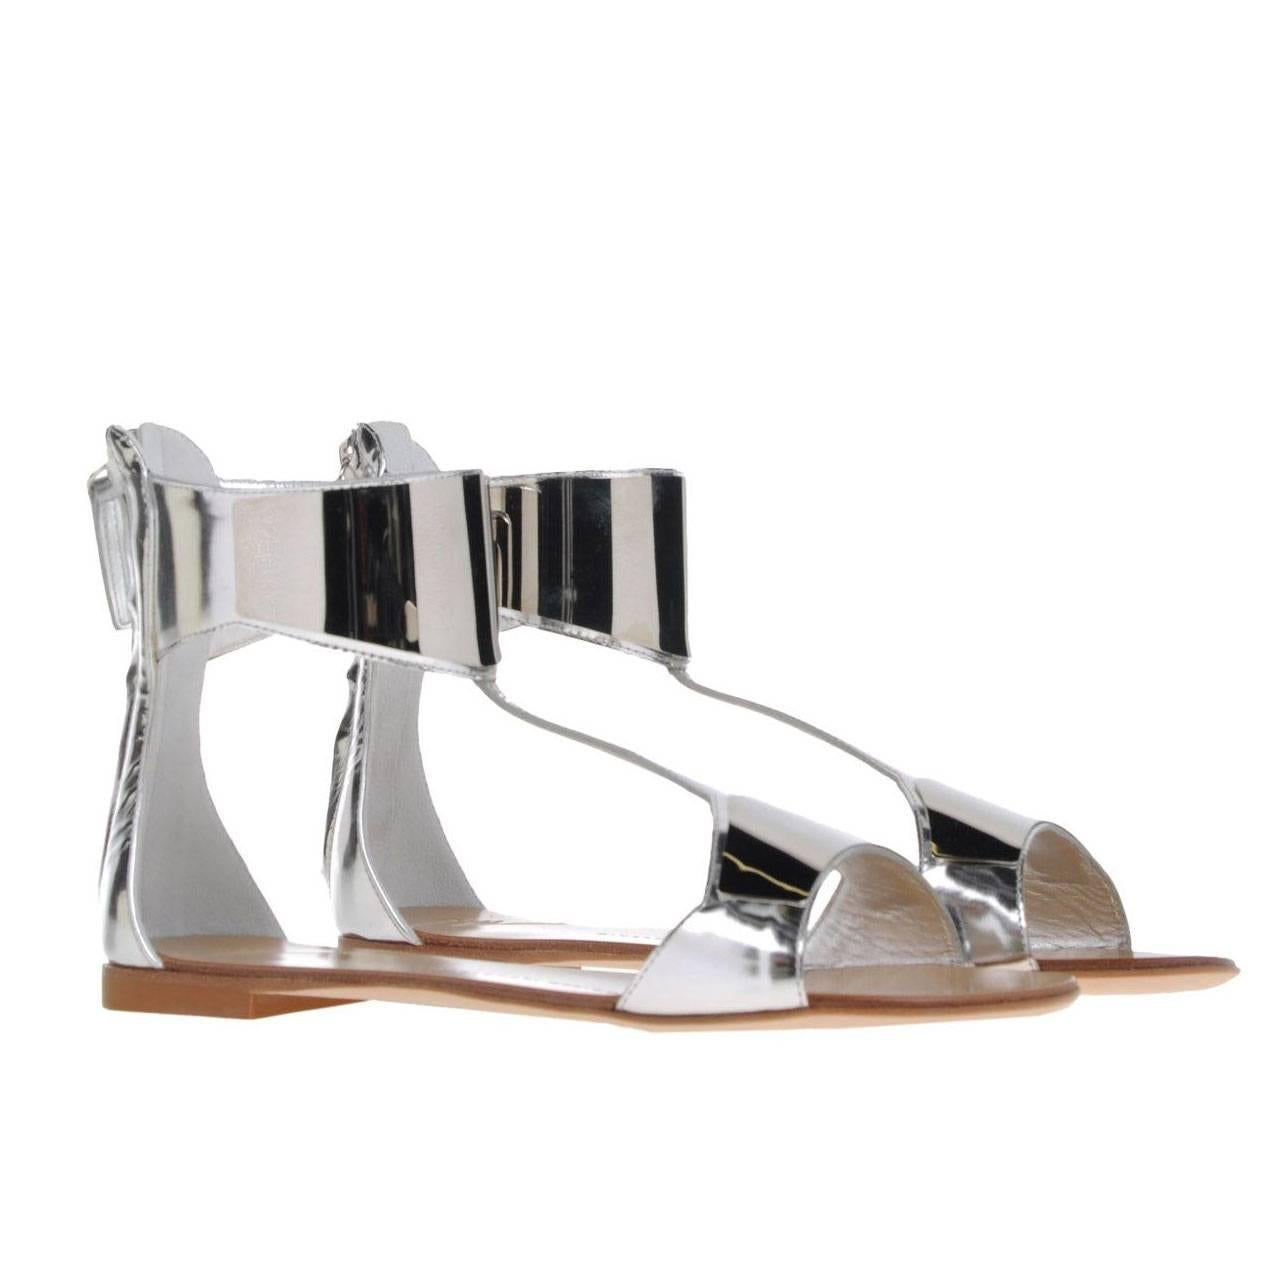 Giuseppe Zanotti NEW and SOLD Silver Leather Gladiator Flats Sandals in Box